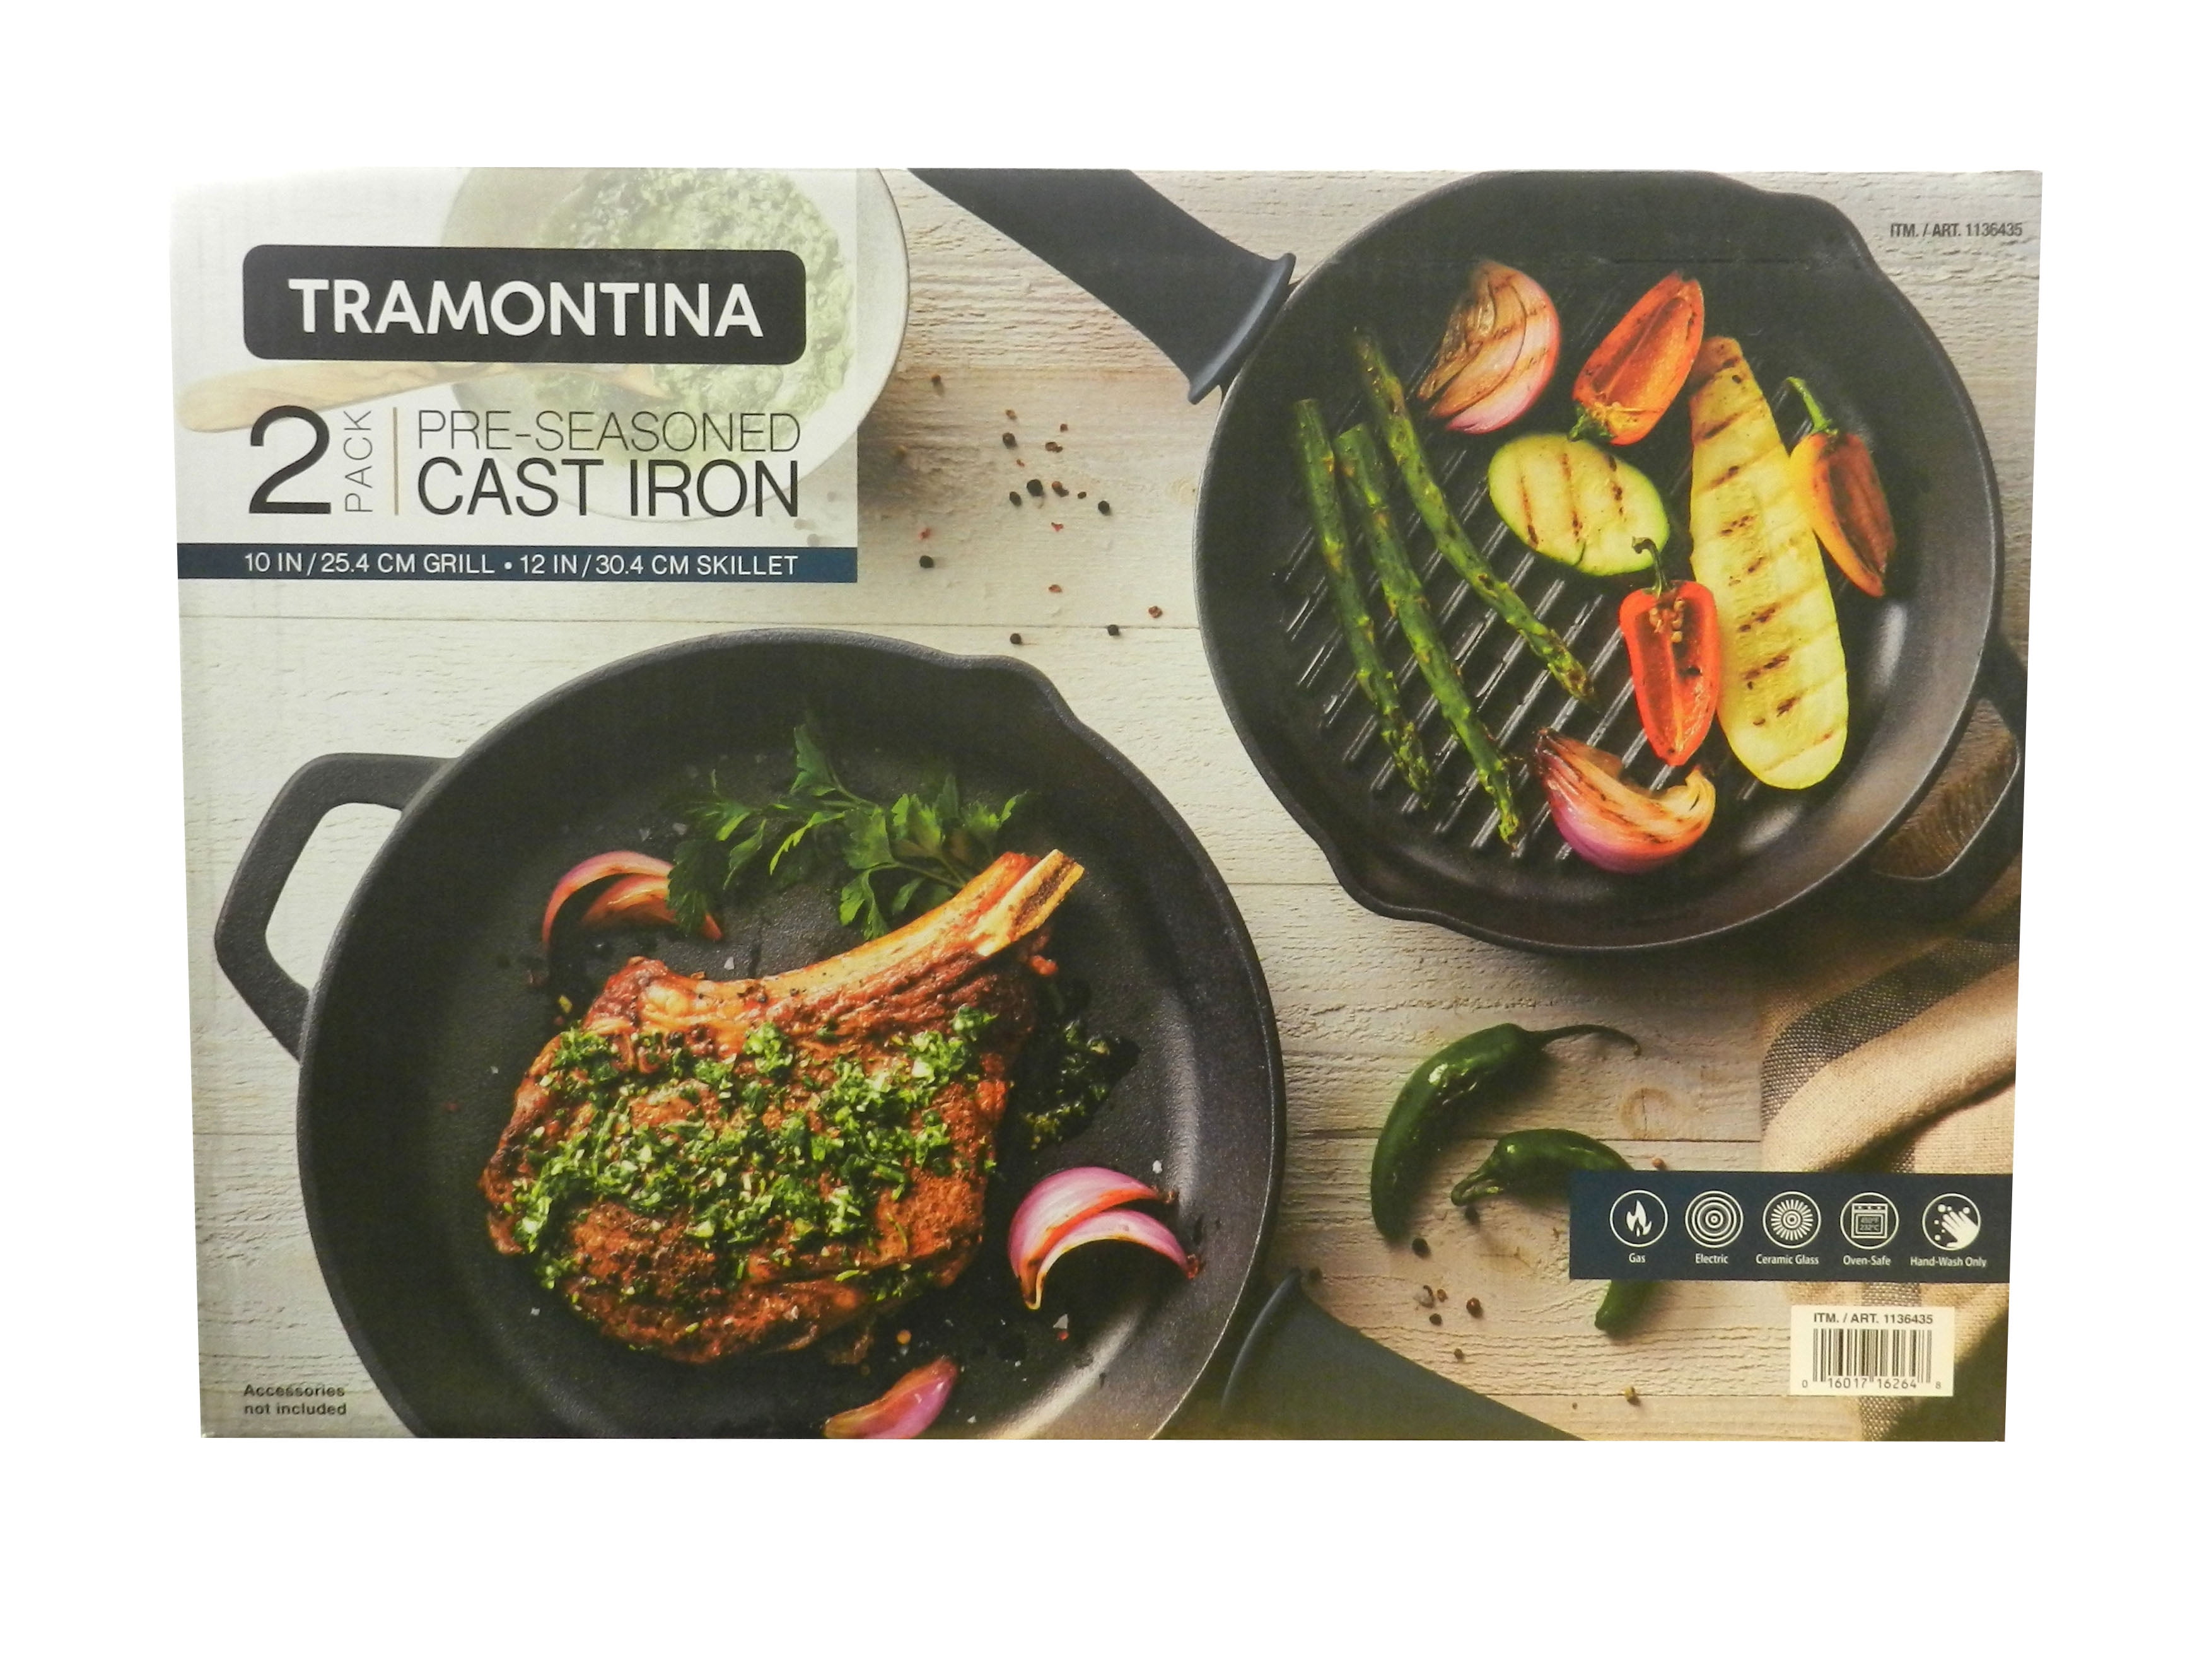 New Tramontina Pre-Seasoned Cast Iron 2-Pack 12” Skillet & 10” Grill Blue  Handle